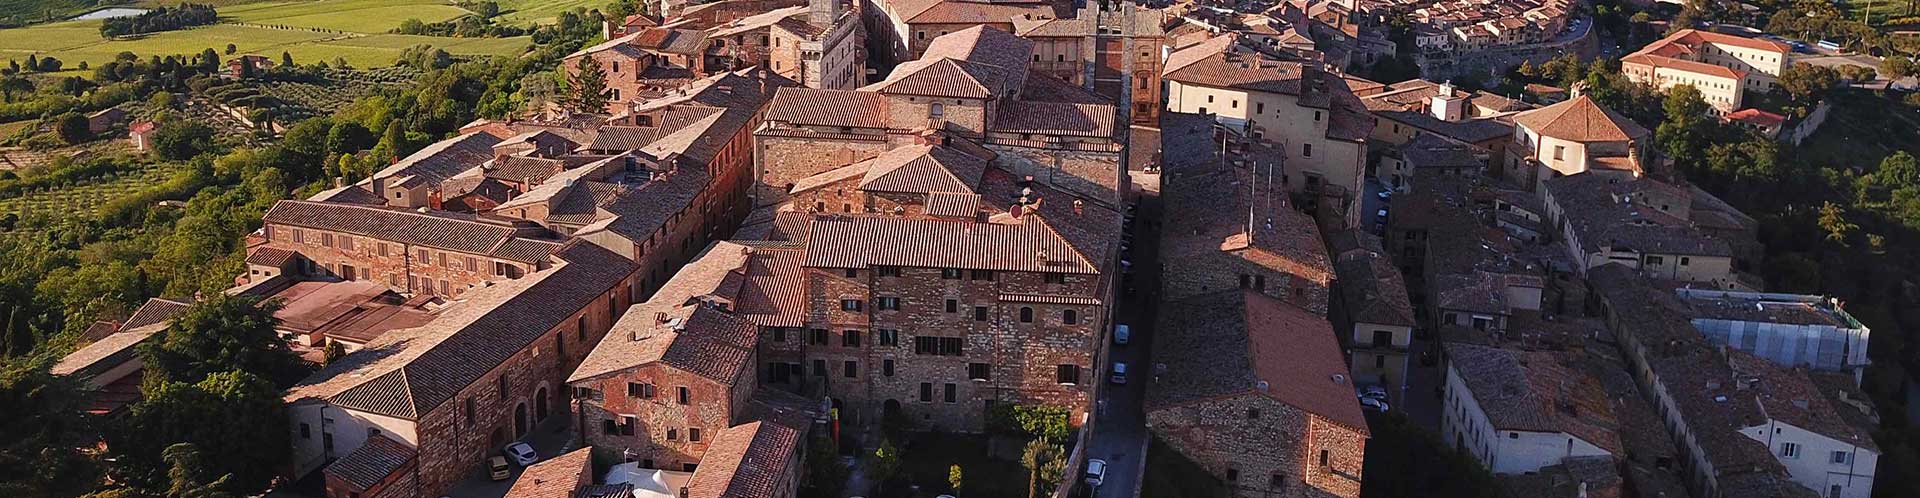 aerial view of Montepulciano Italy